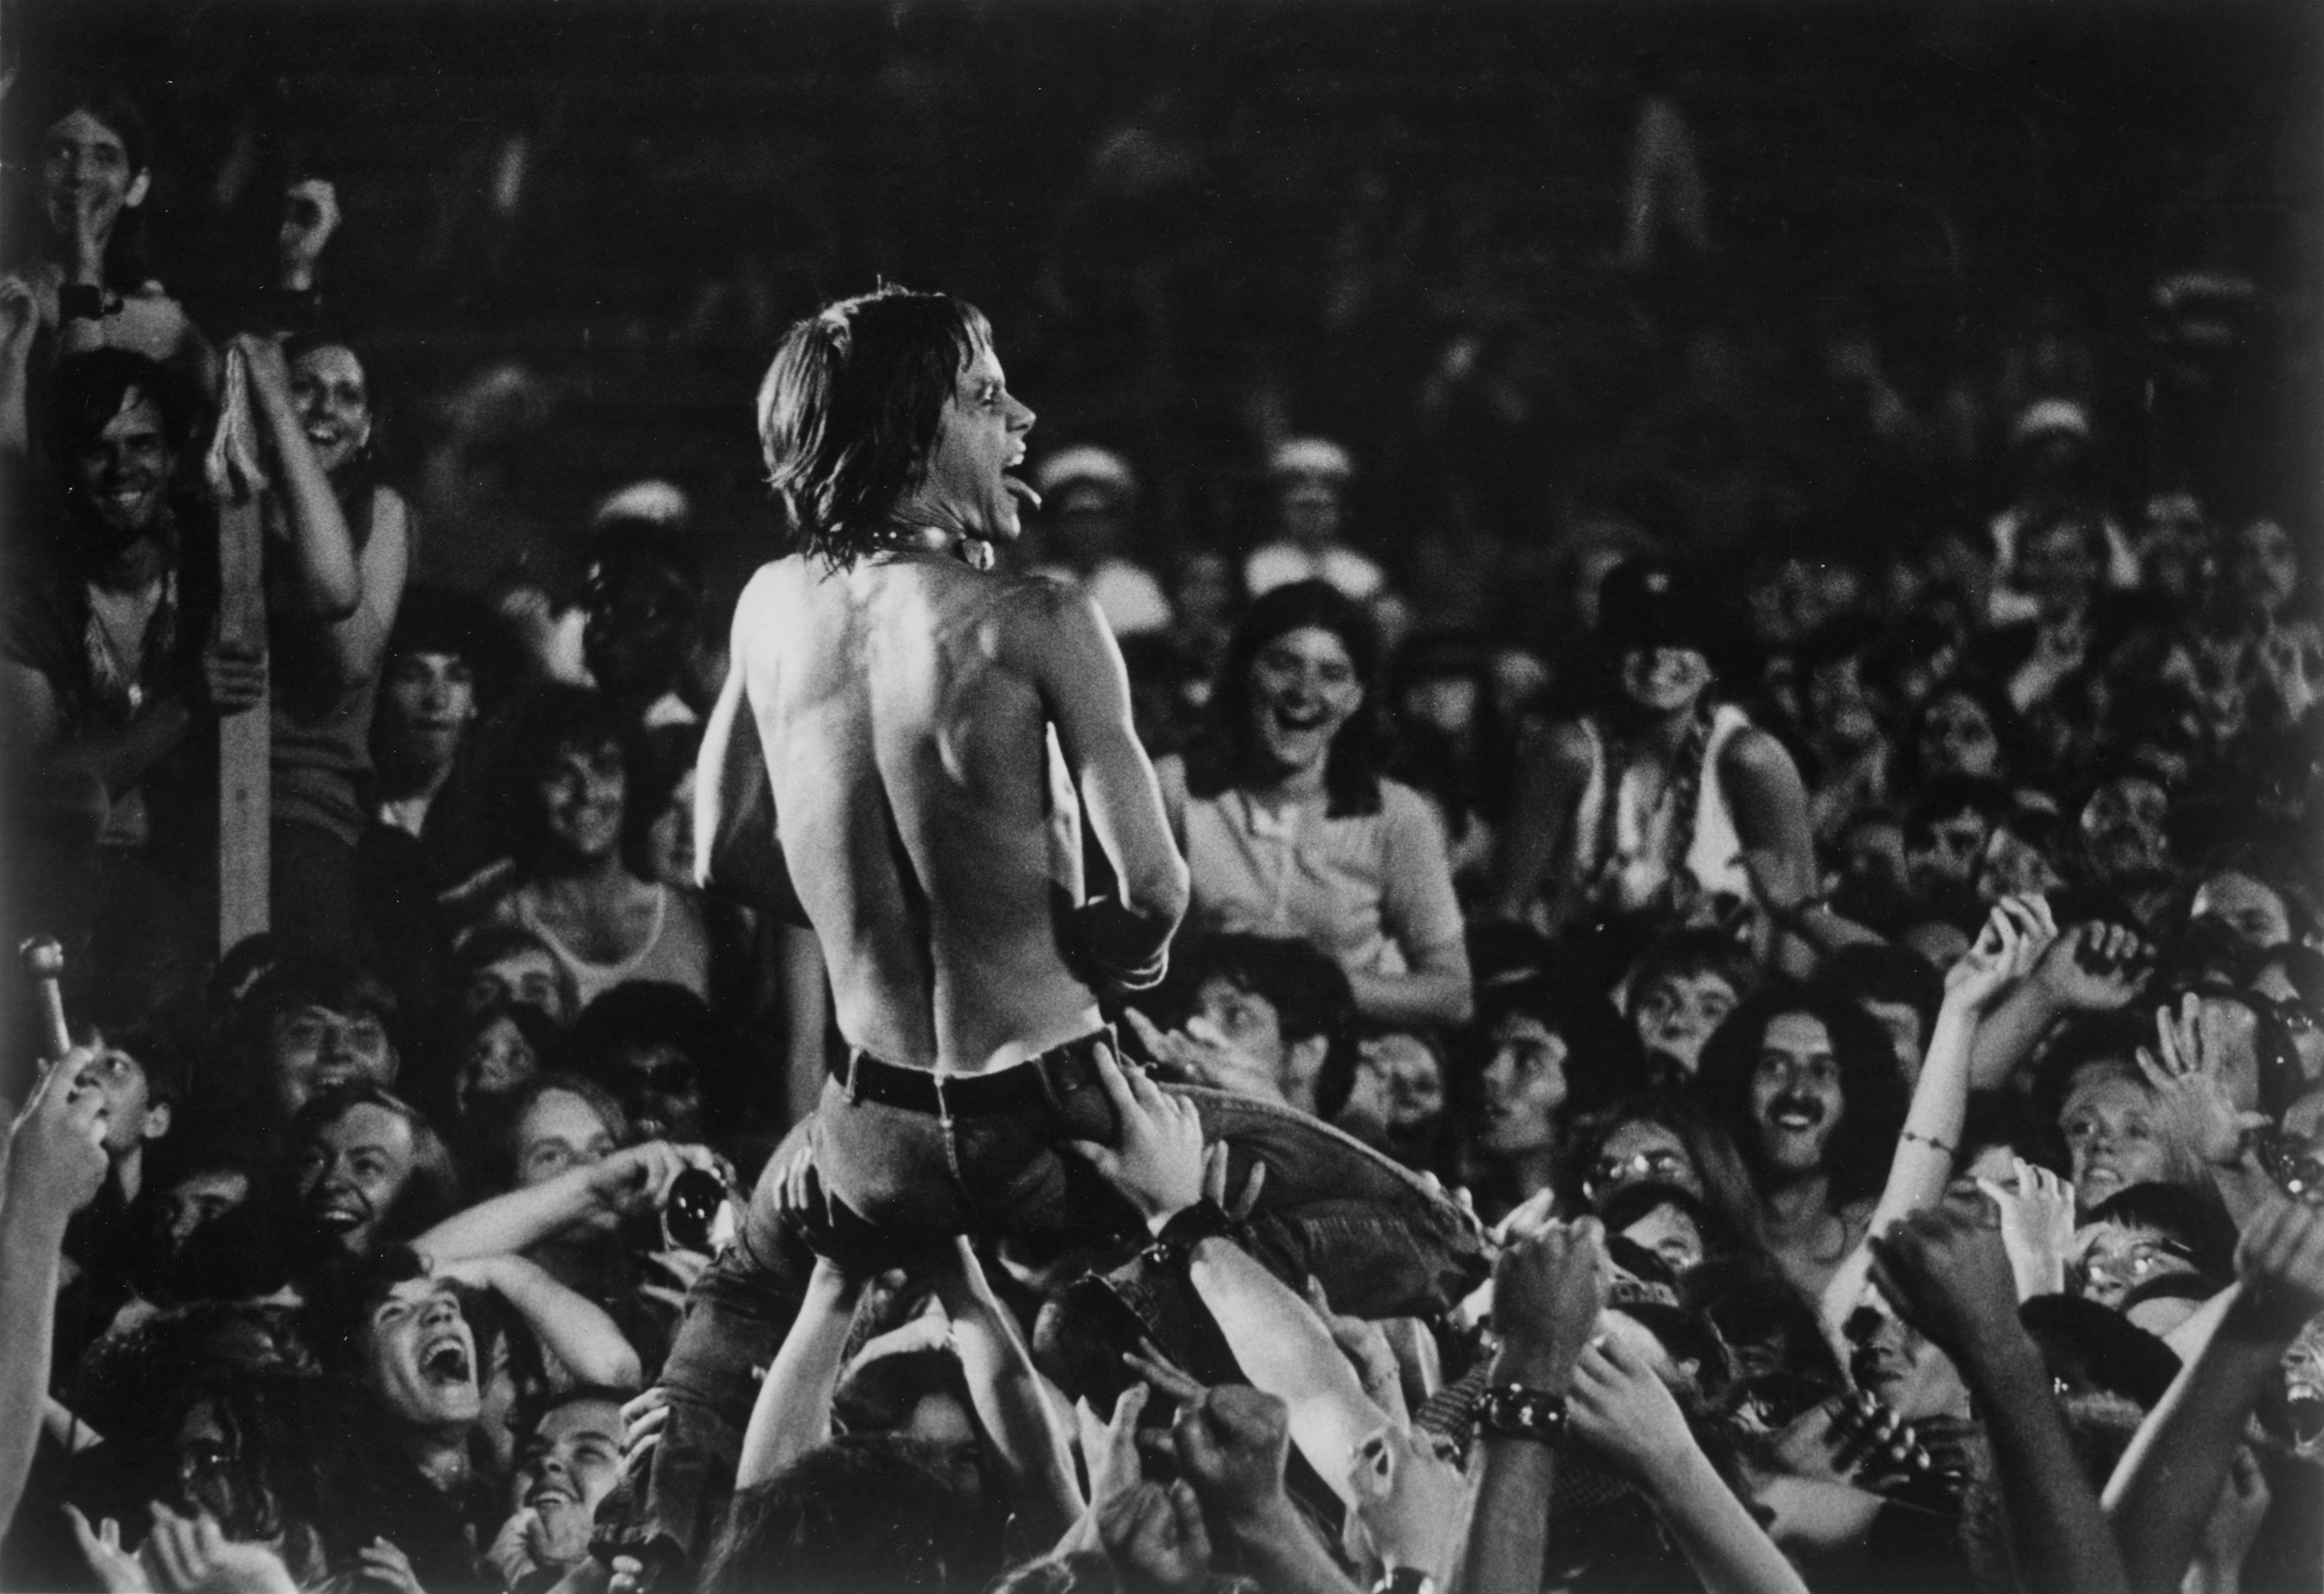 The stooges i wanna be your. Группа the stooges. The stooges 1967. The stooges 1969. Группа the stooges Игги поп.